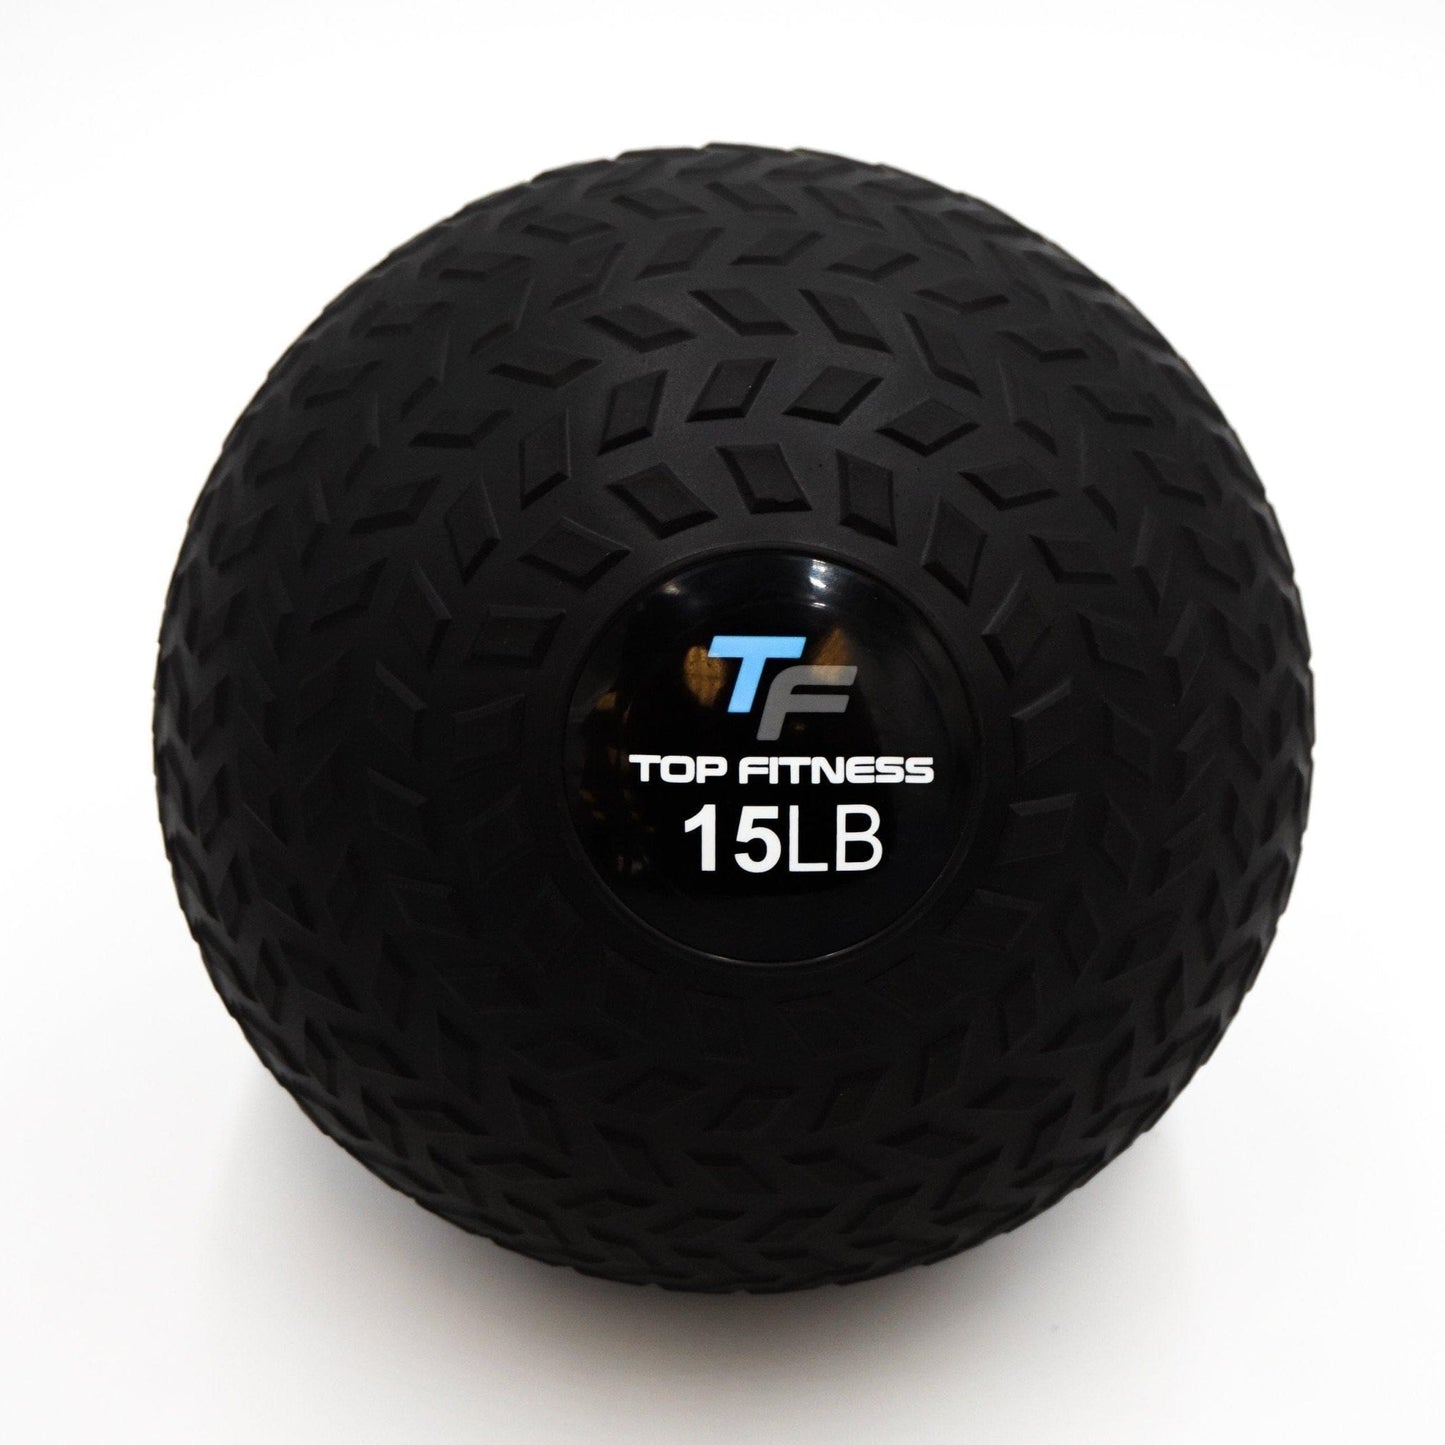 Top Fitness Slam Ball Weighted Resistance Top Fitness 15lb